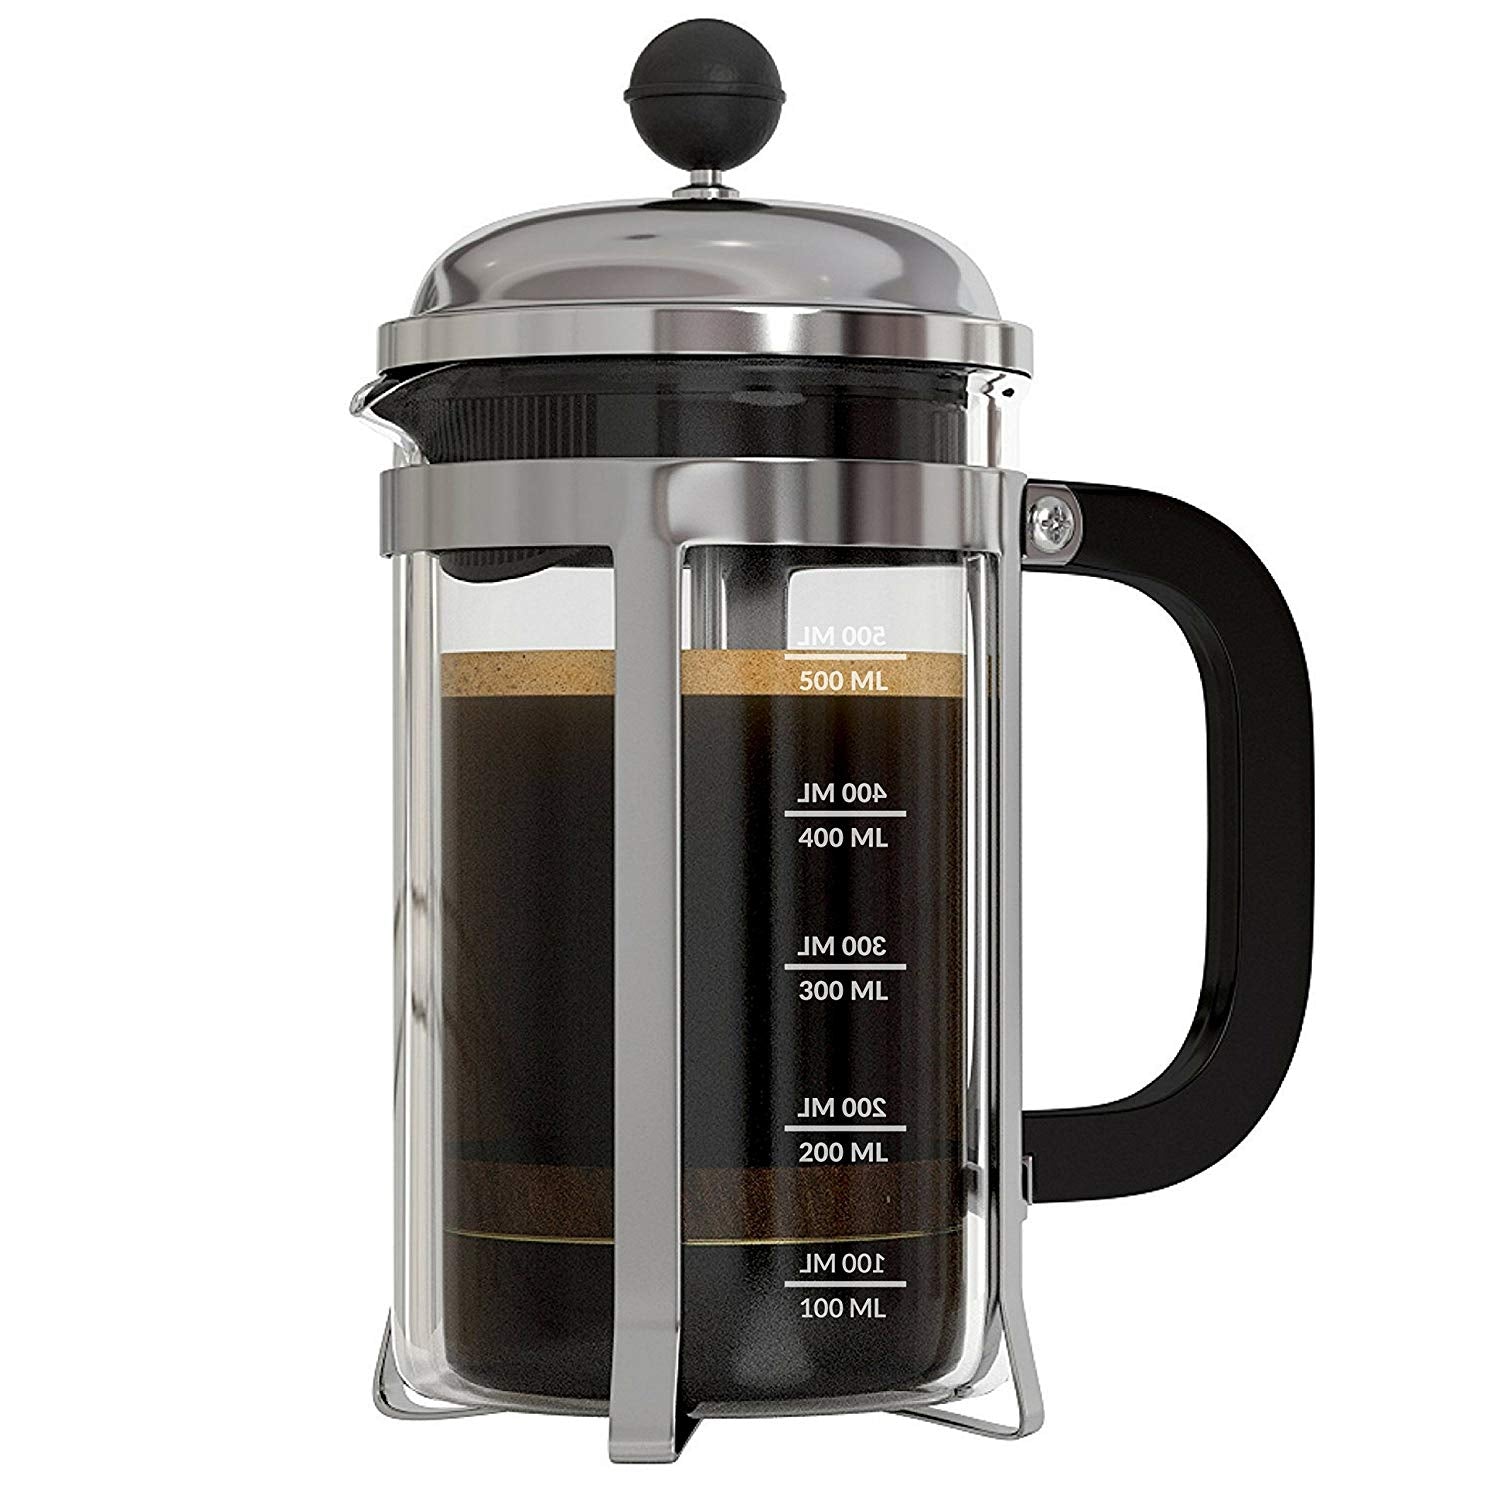 Lafeeca Stainless Steel French Press 4-Piece + Plunger